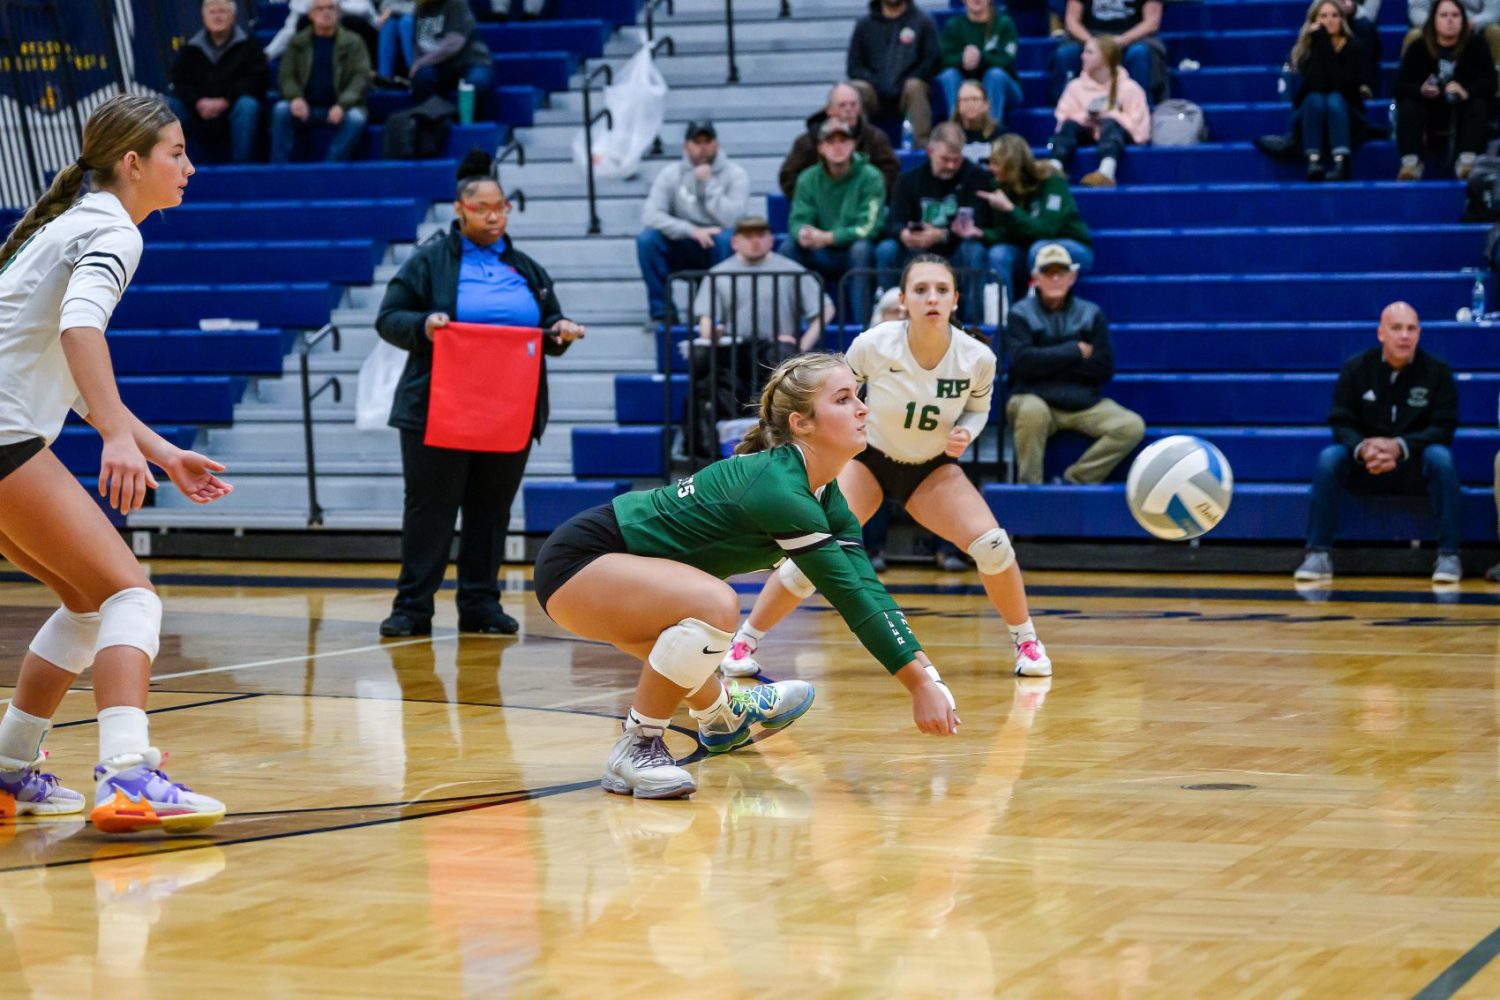 Grand Haven wins in three sets over Reeths-Puffer in Division 1 volleyball district semifinal